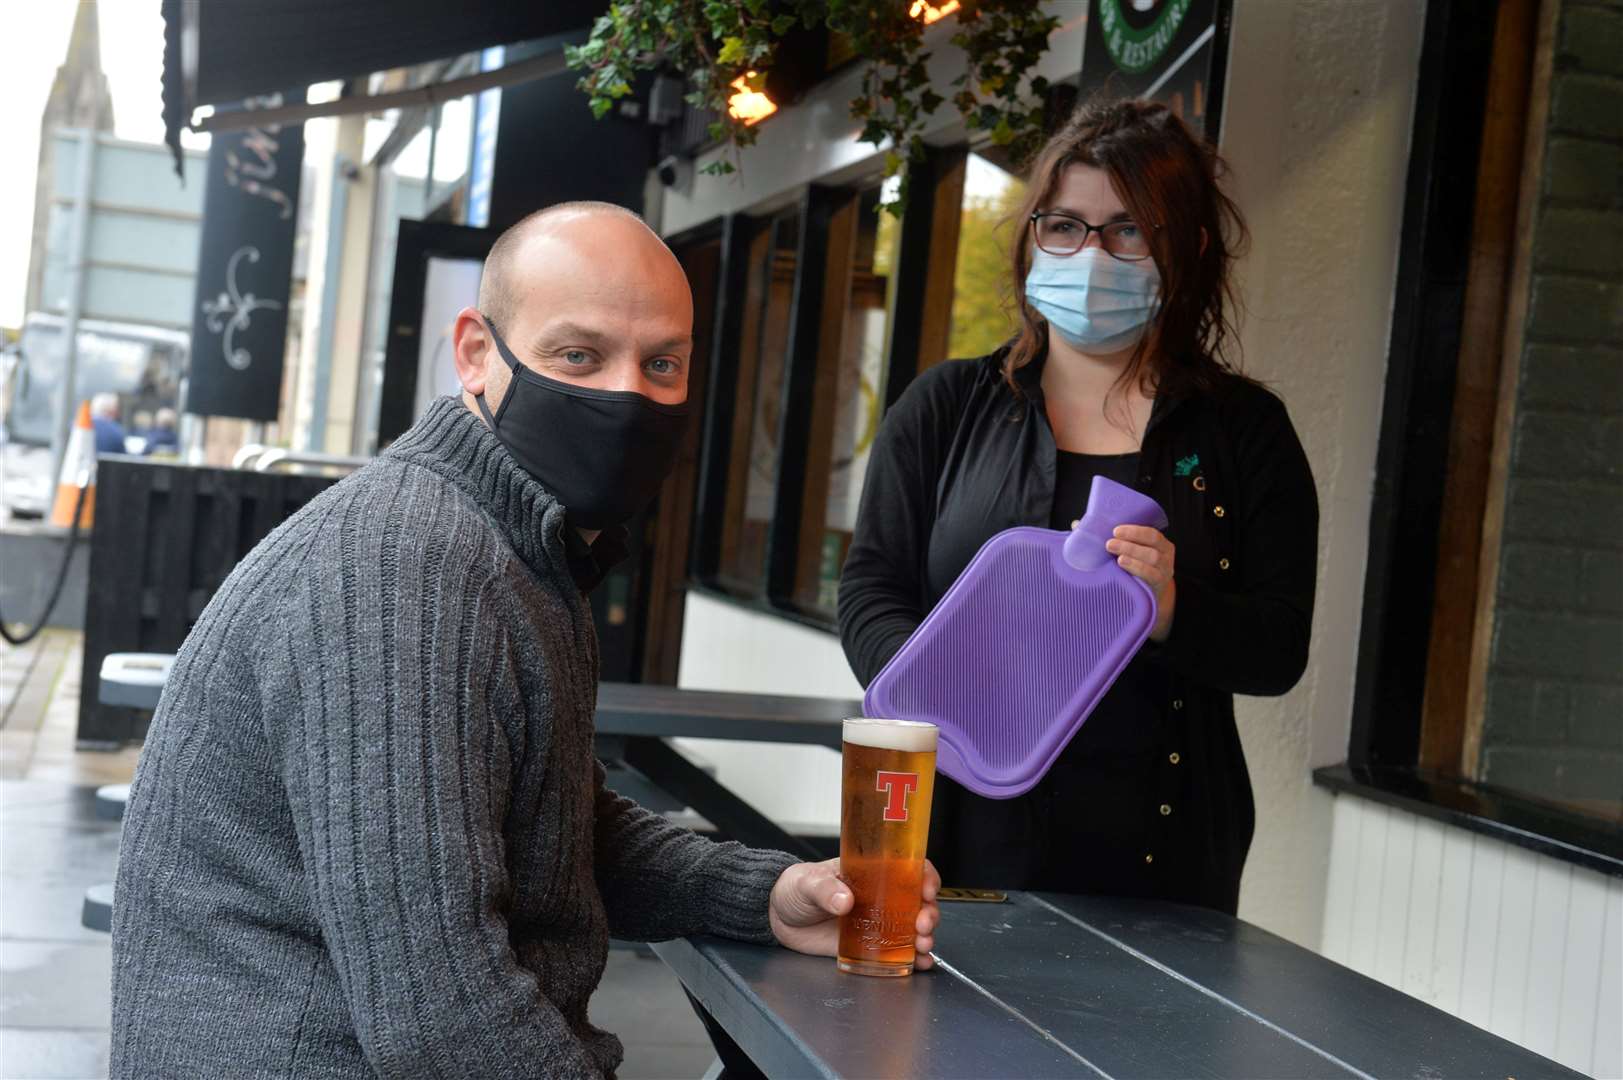 Wes Taylor-Marriott and Lucy MacGillvray at Johnny Foxes, which ws giving out hot water bottles to customers.